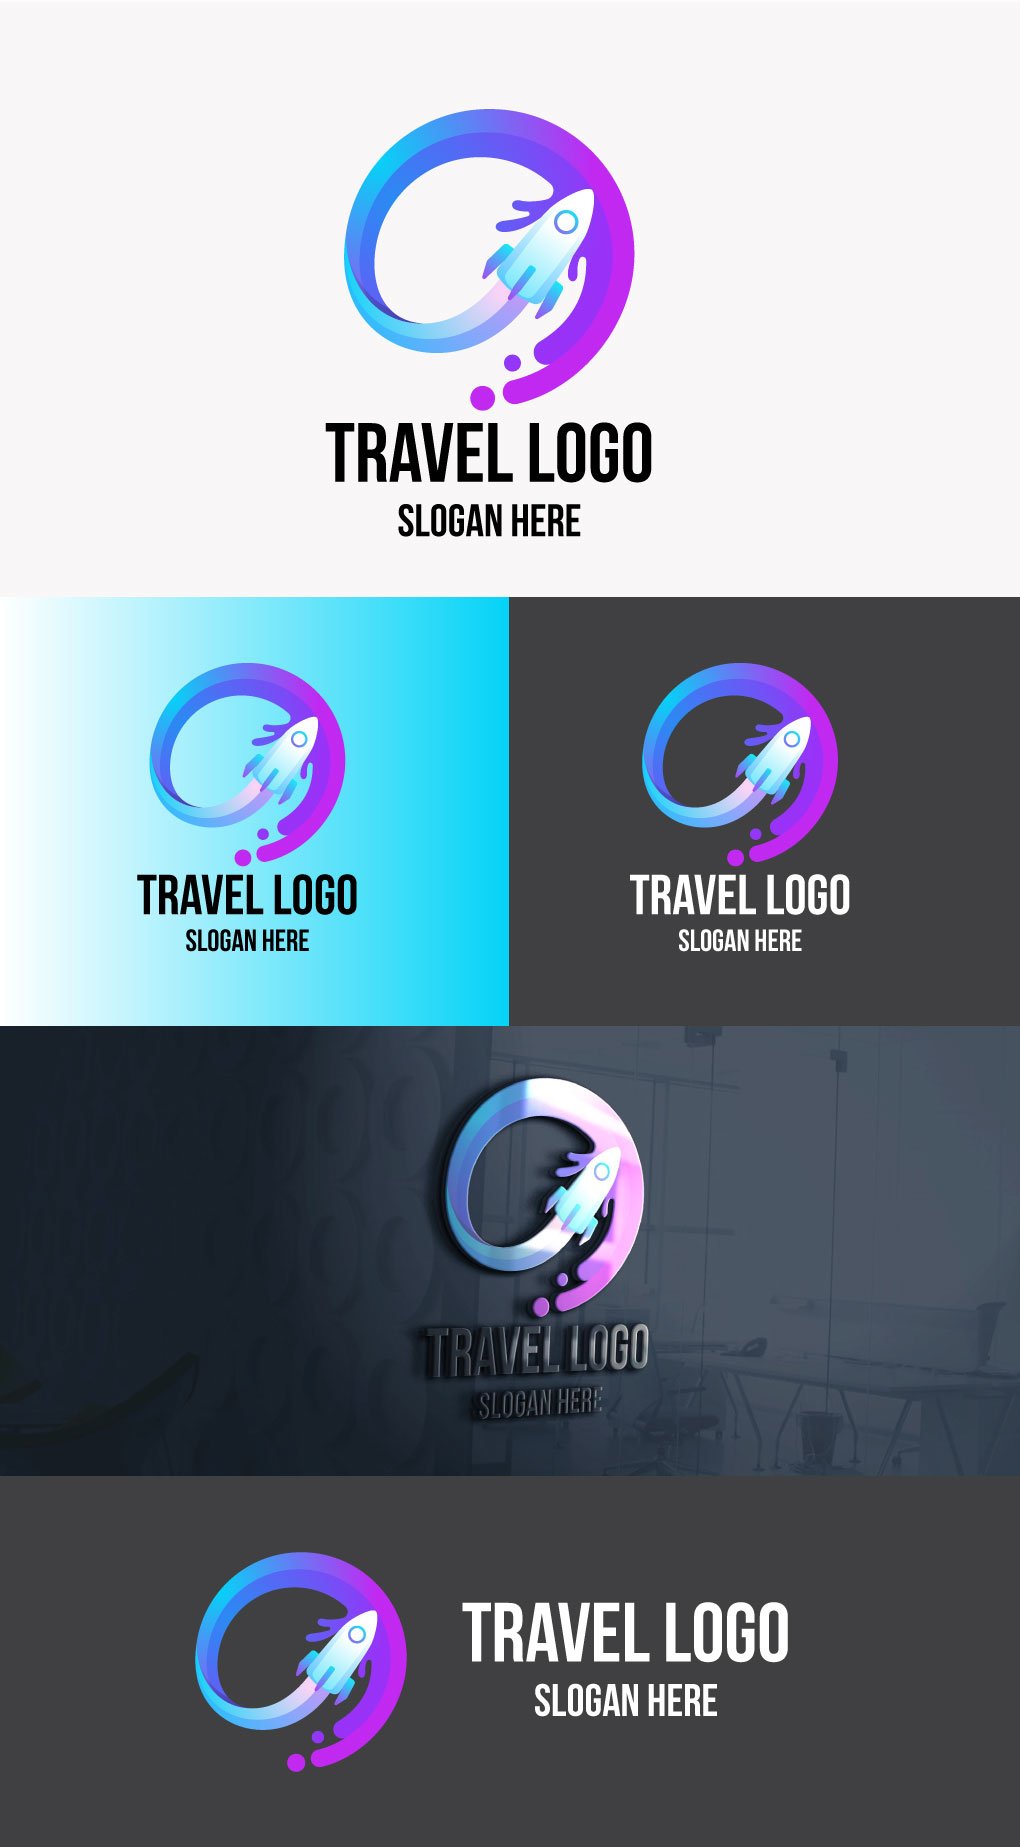 Logo Design For Travel company Free ai download – GraphicsFamily